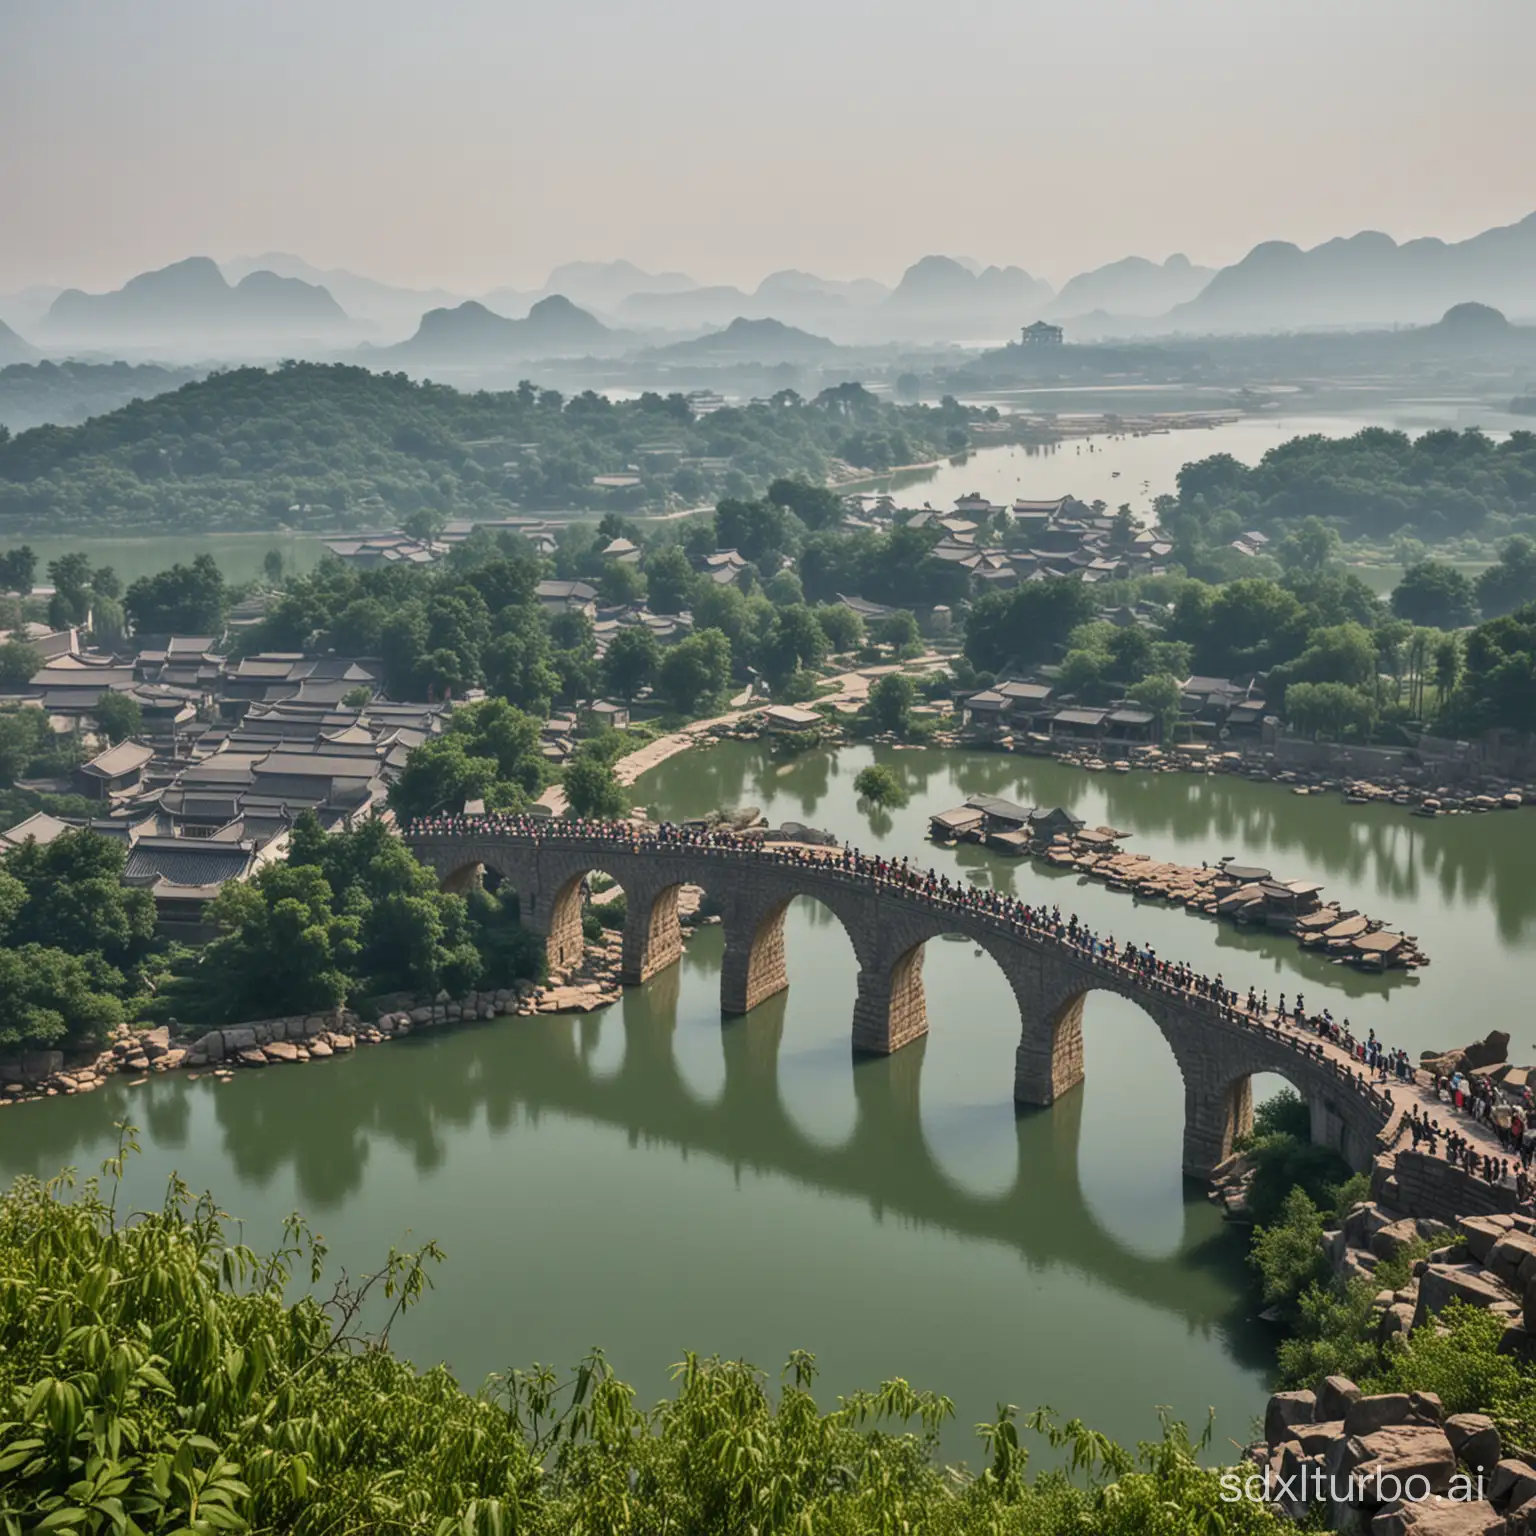 /I A super huge stone stone arch bridge, farmers, lake, there are many Chinese buildings in the distance